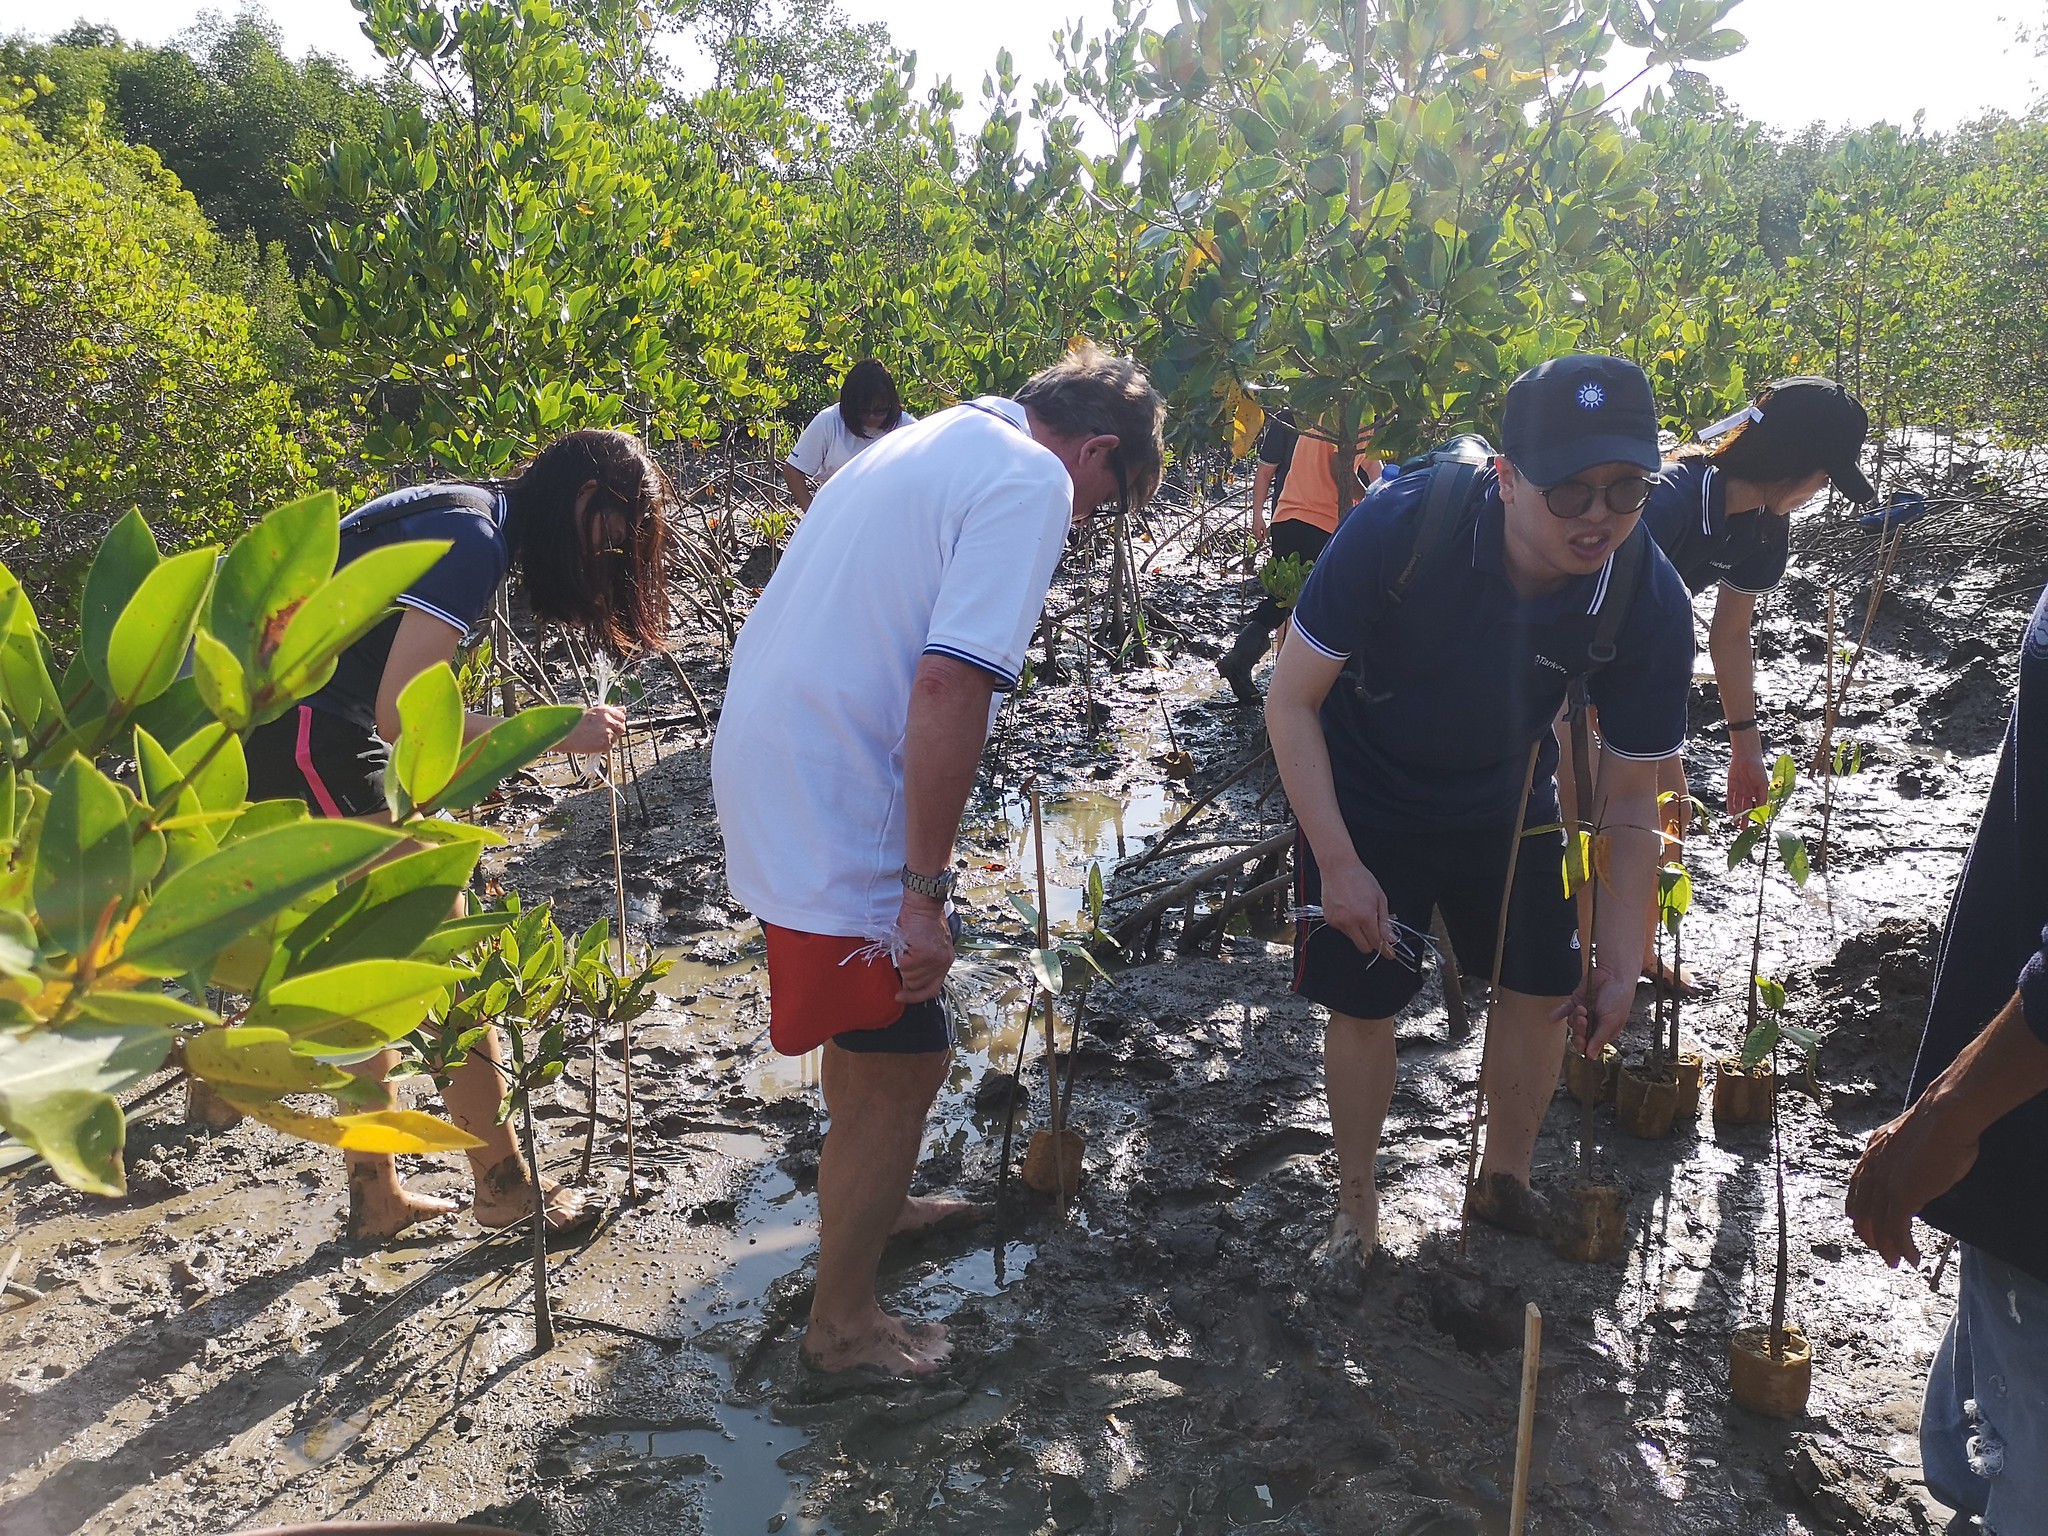 Participants took part in a mangrove reforestation project, planting new mangrove trees in designated conservation areas